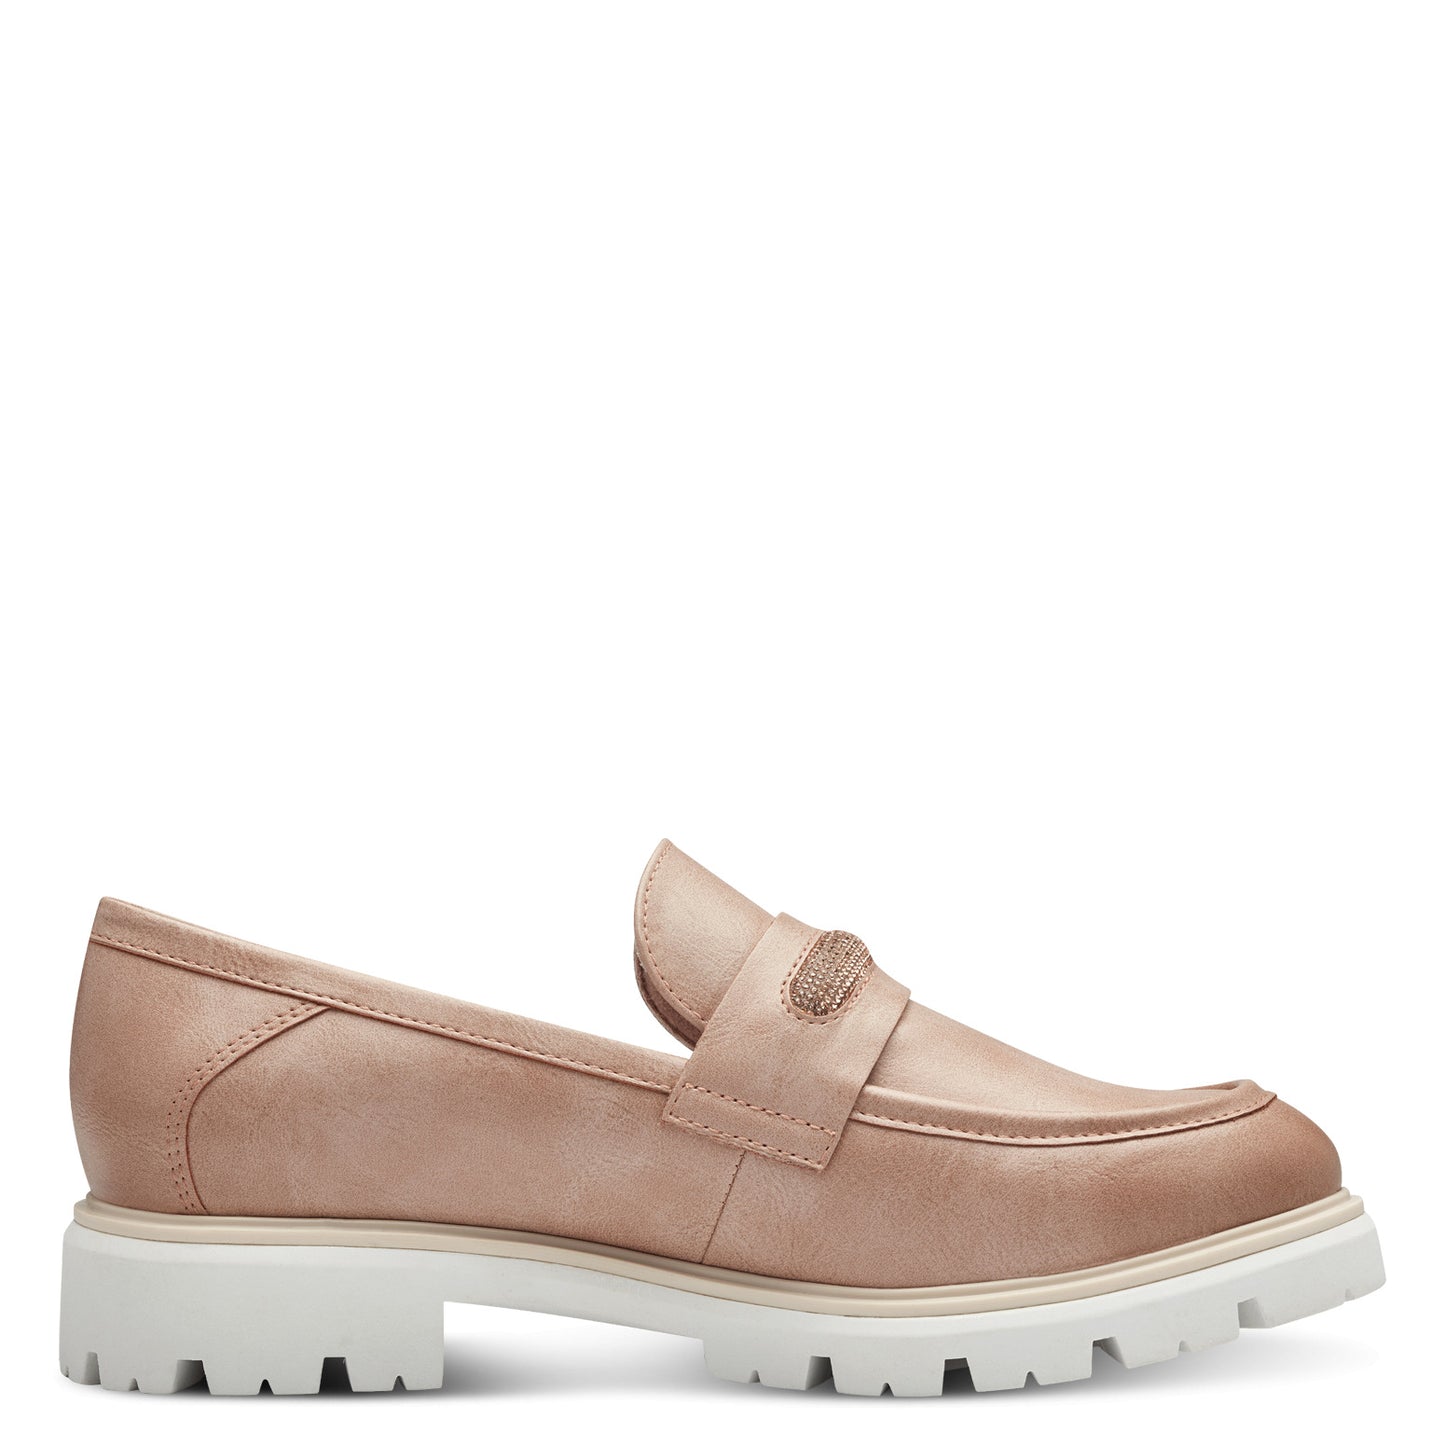 Marco Tozzi 2-24700-42 408 Nude Slip-On Casual Shoes